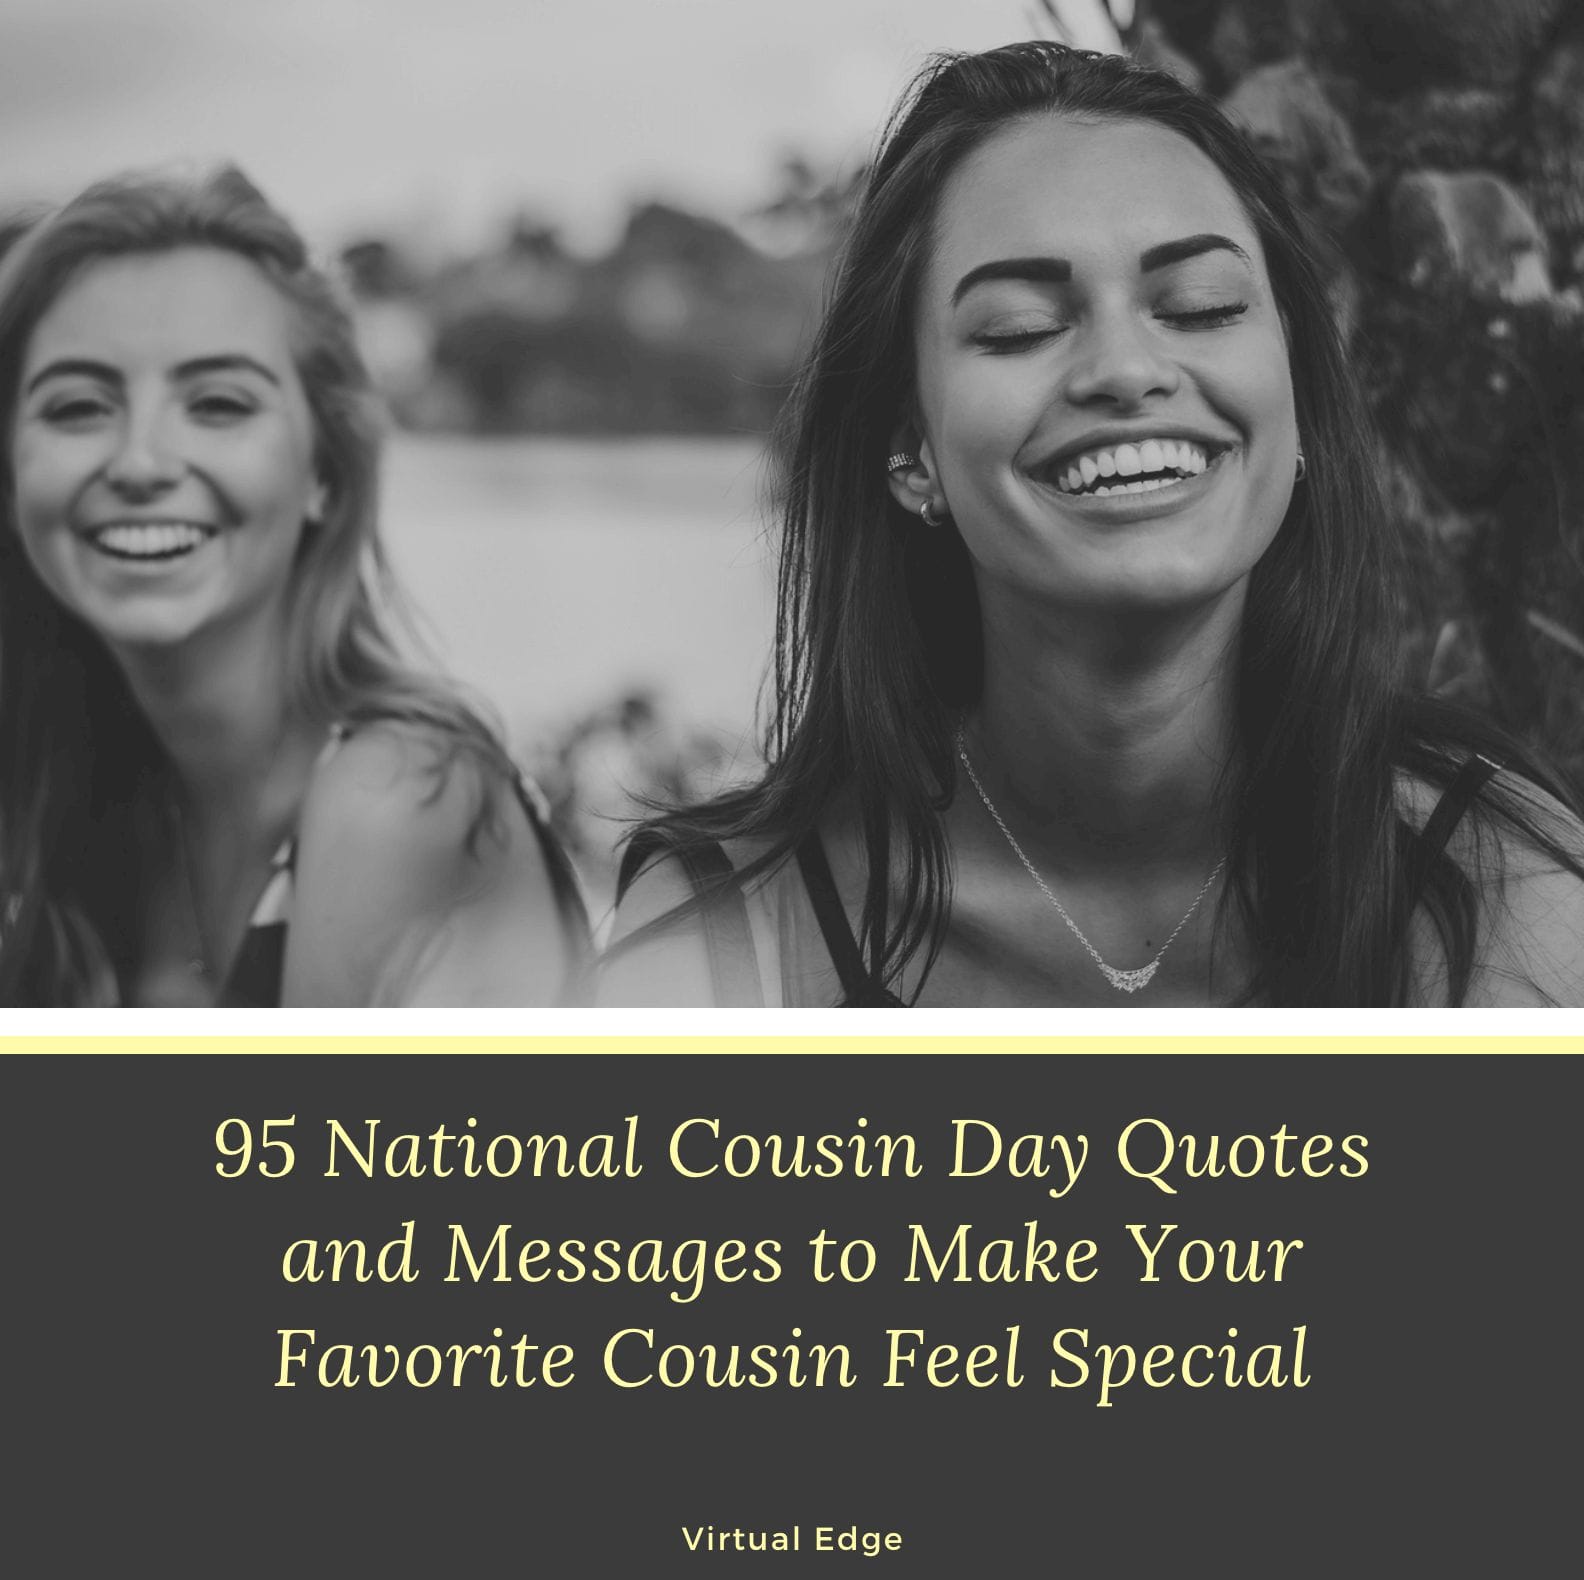 95 National Cousin Day Quotes and Messages to Make Your Favorite Cousin Feel Special